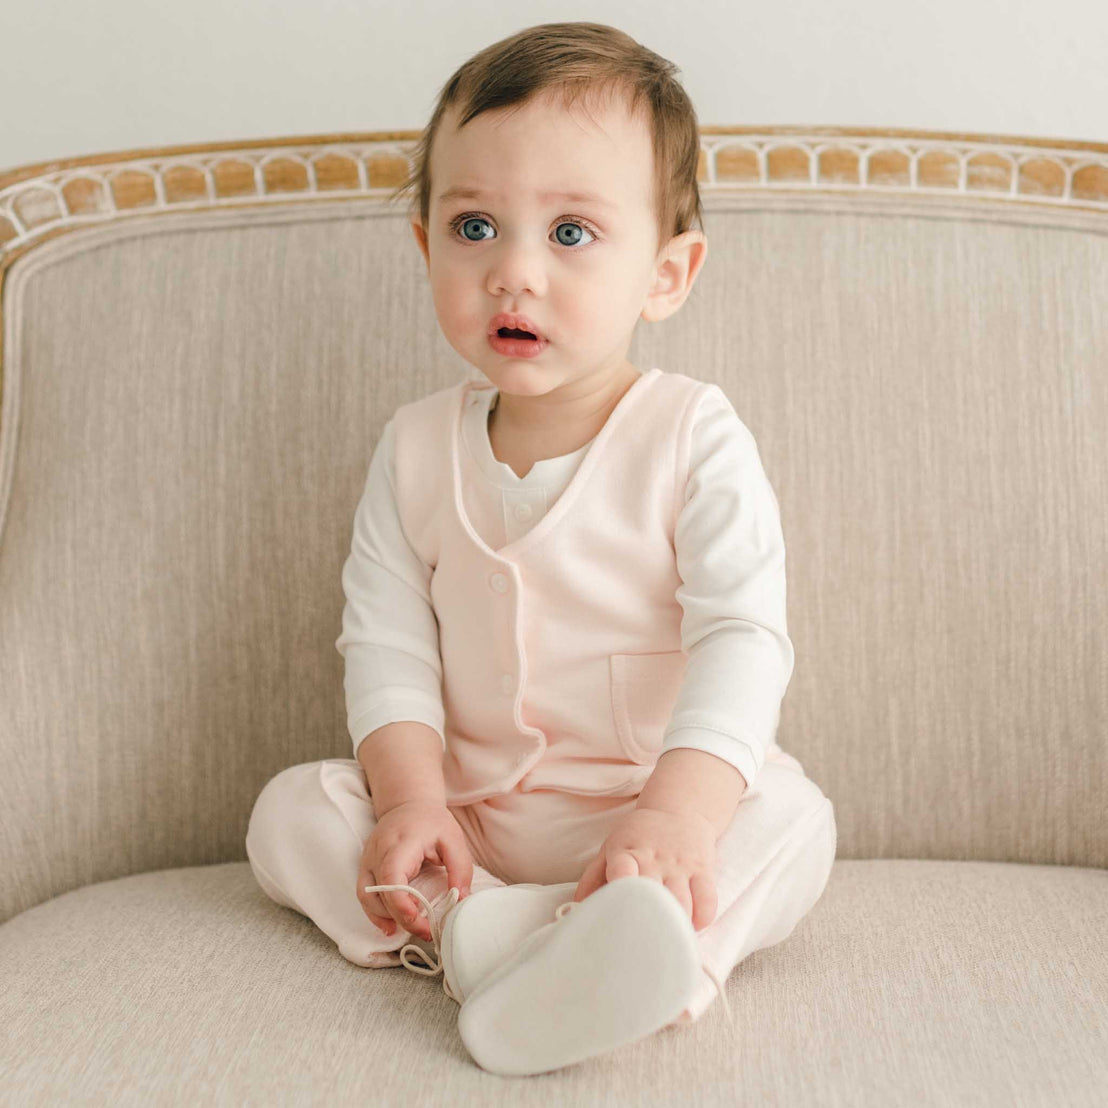 Baby boy sitting in blush cotton vest and pants